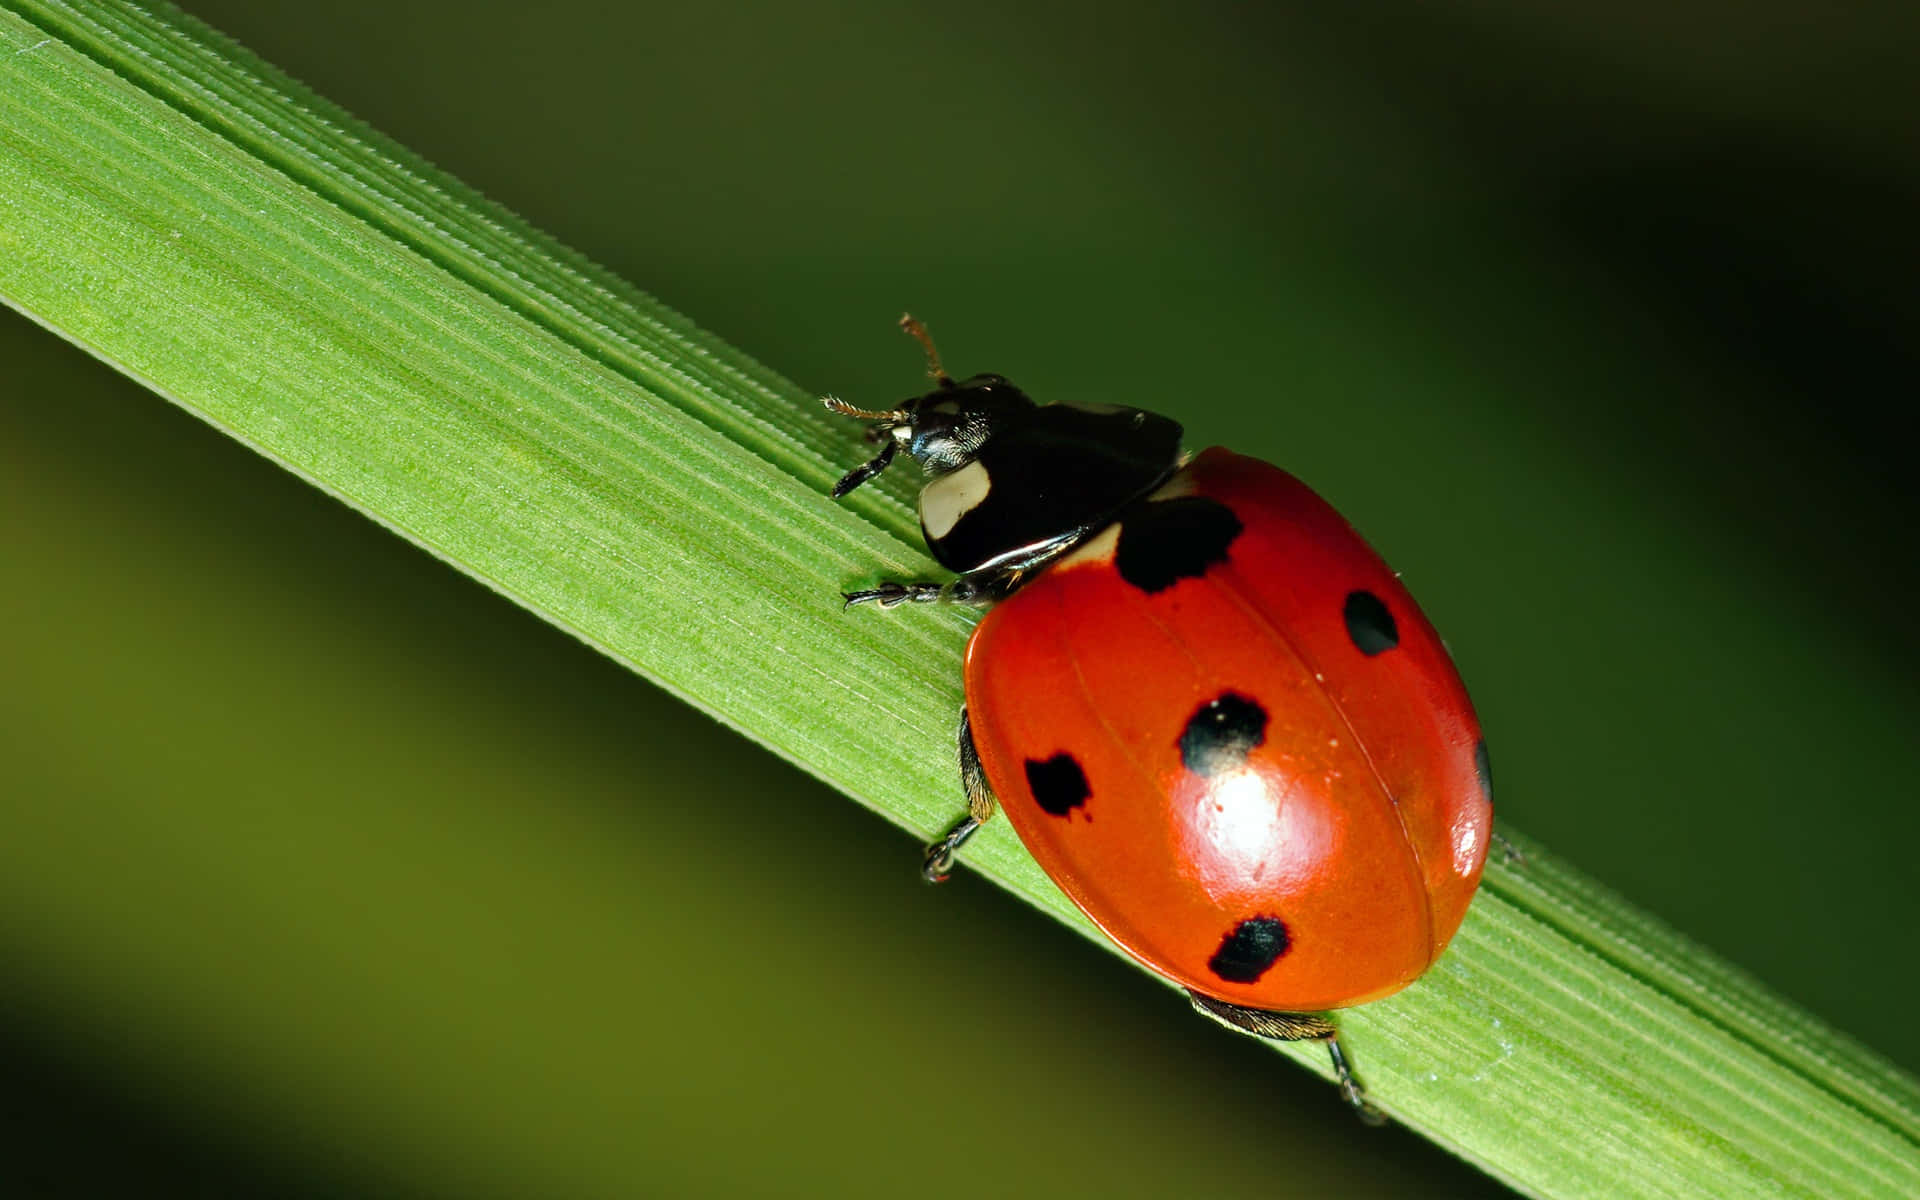 A Ladybug Is Sitting On A Blade Of Grass